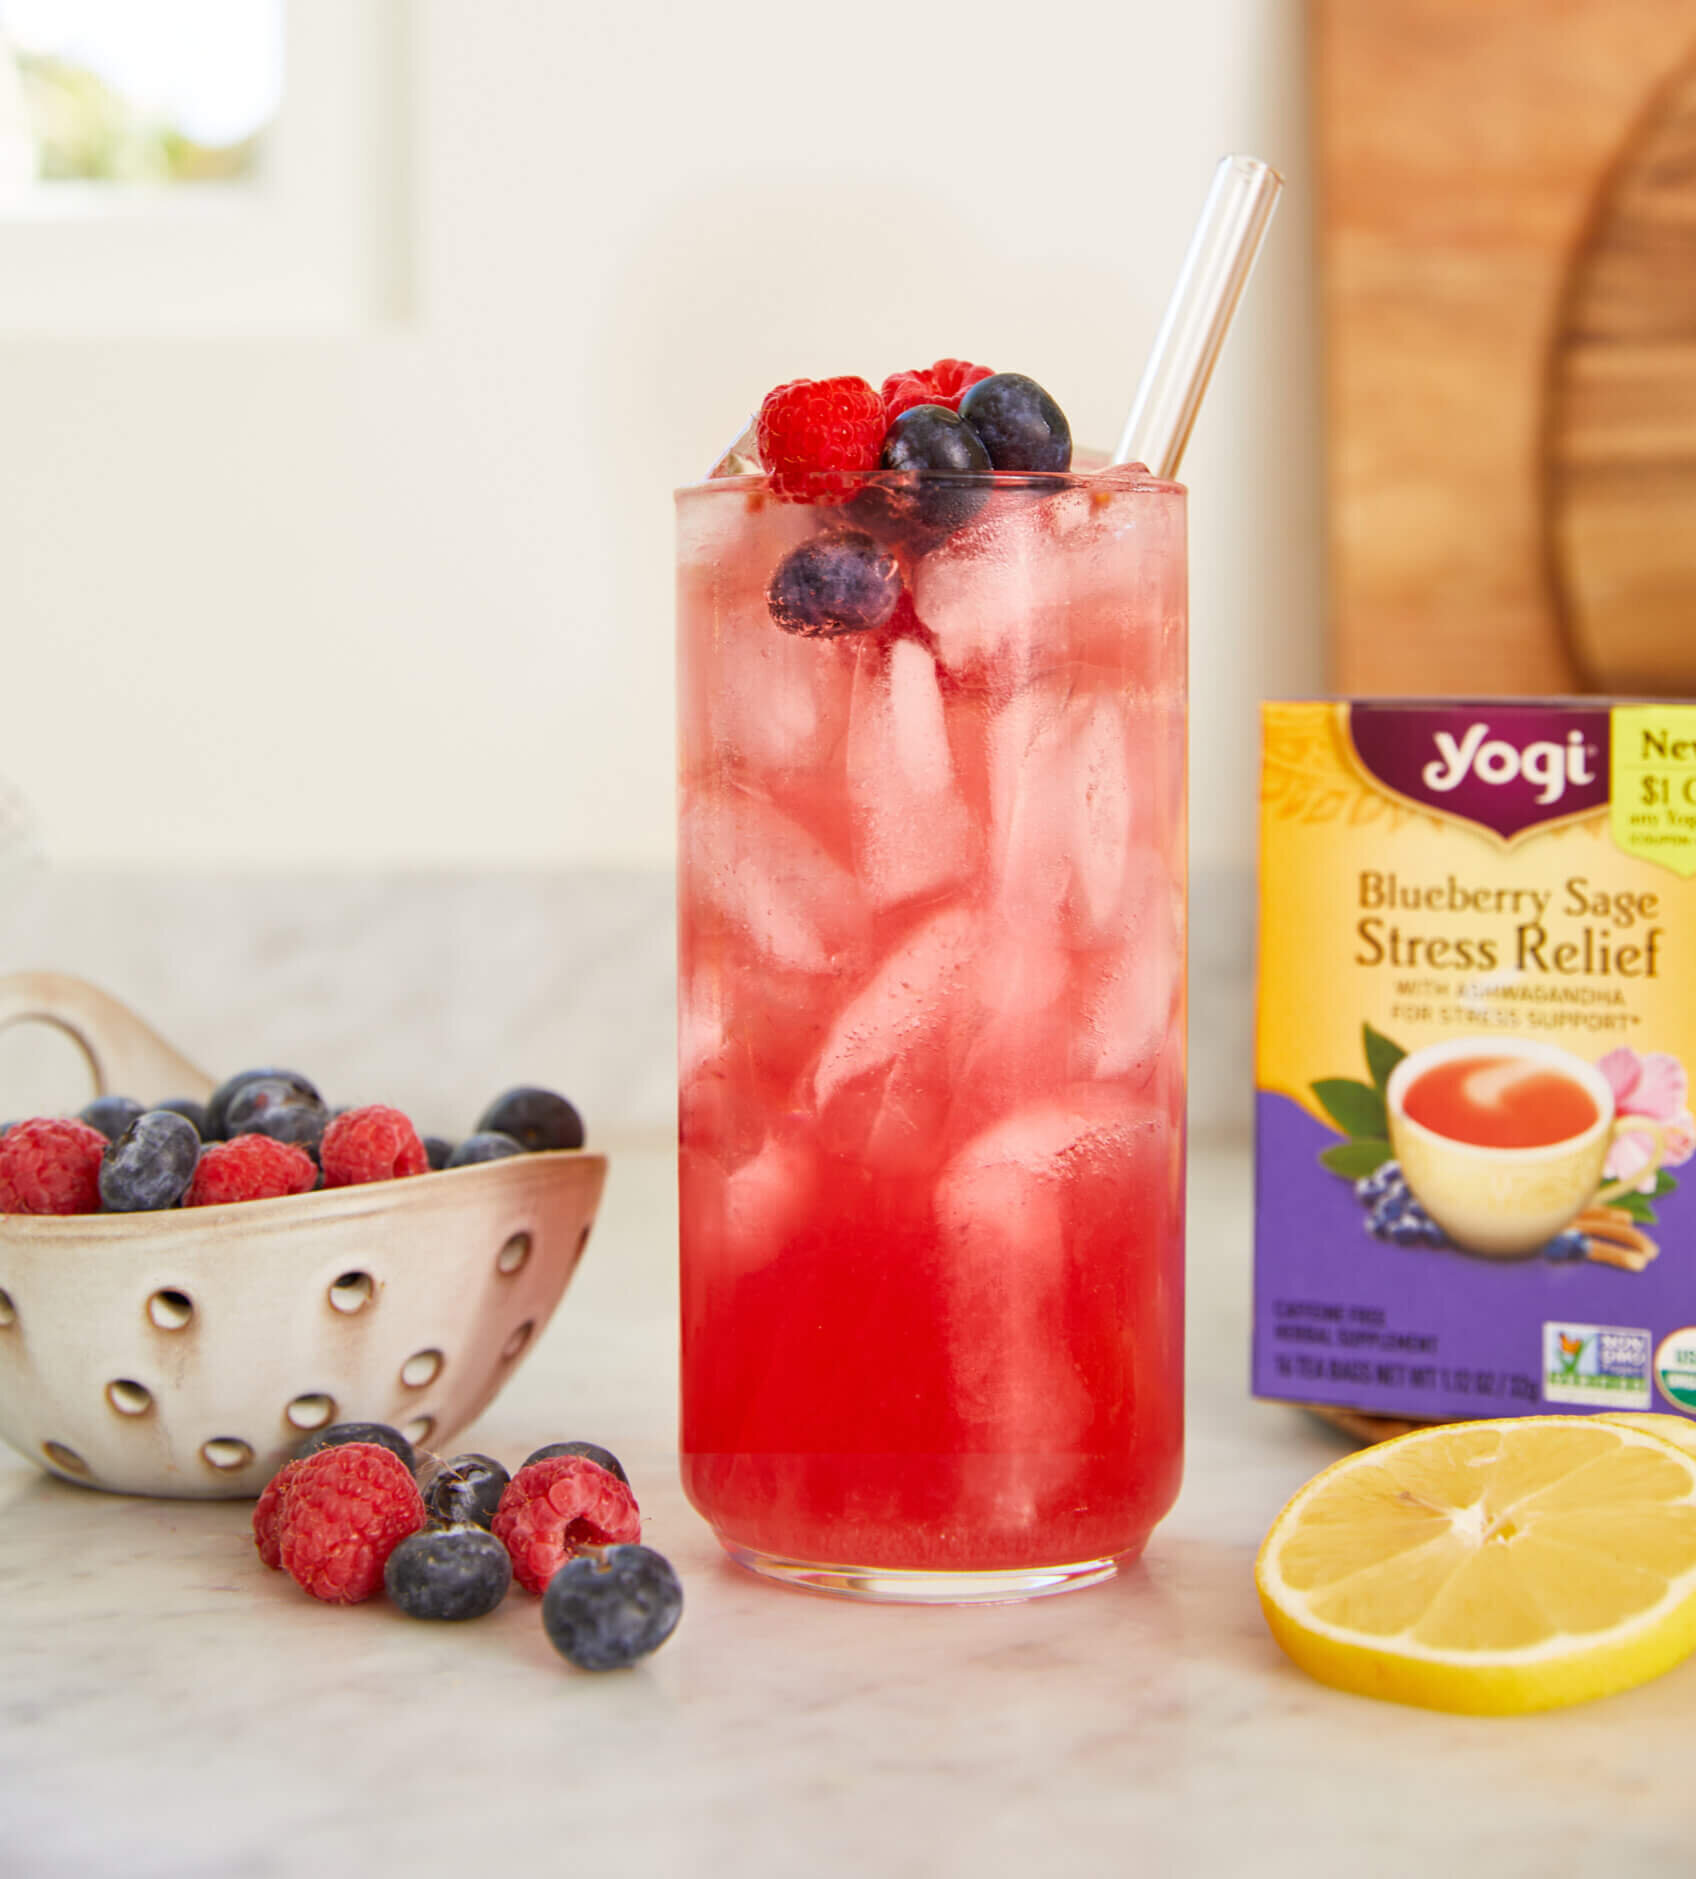 a glass of Mixed Berry Iced Tea Cooler sits on a counter next to a box of Yogi Blueberry Sage Stress Relief tea, a bowl of fresh blueberries and raspberries, and sliced of lemon.